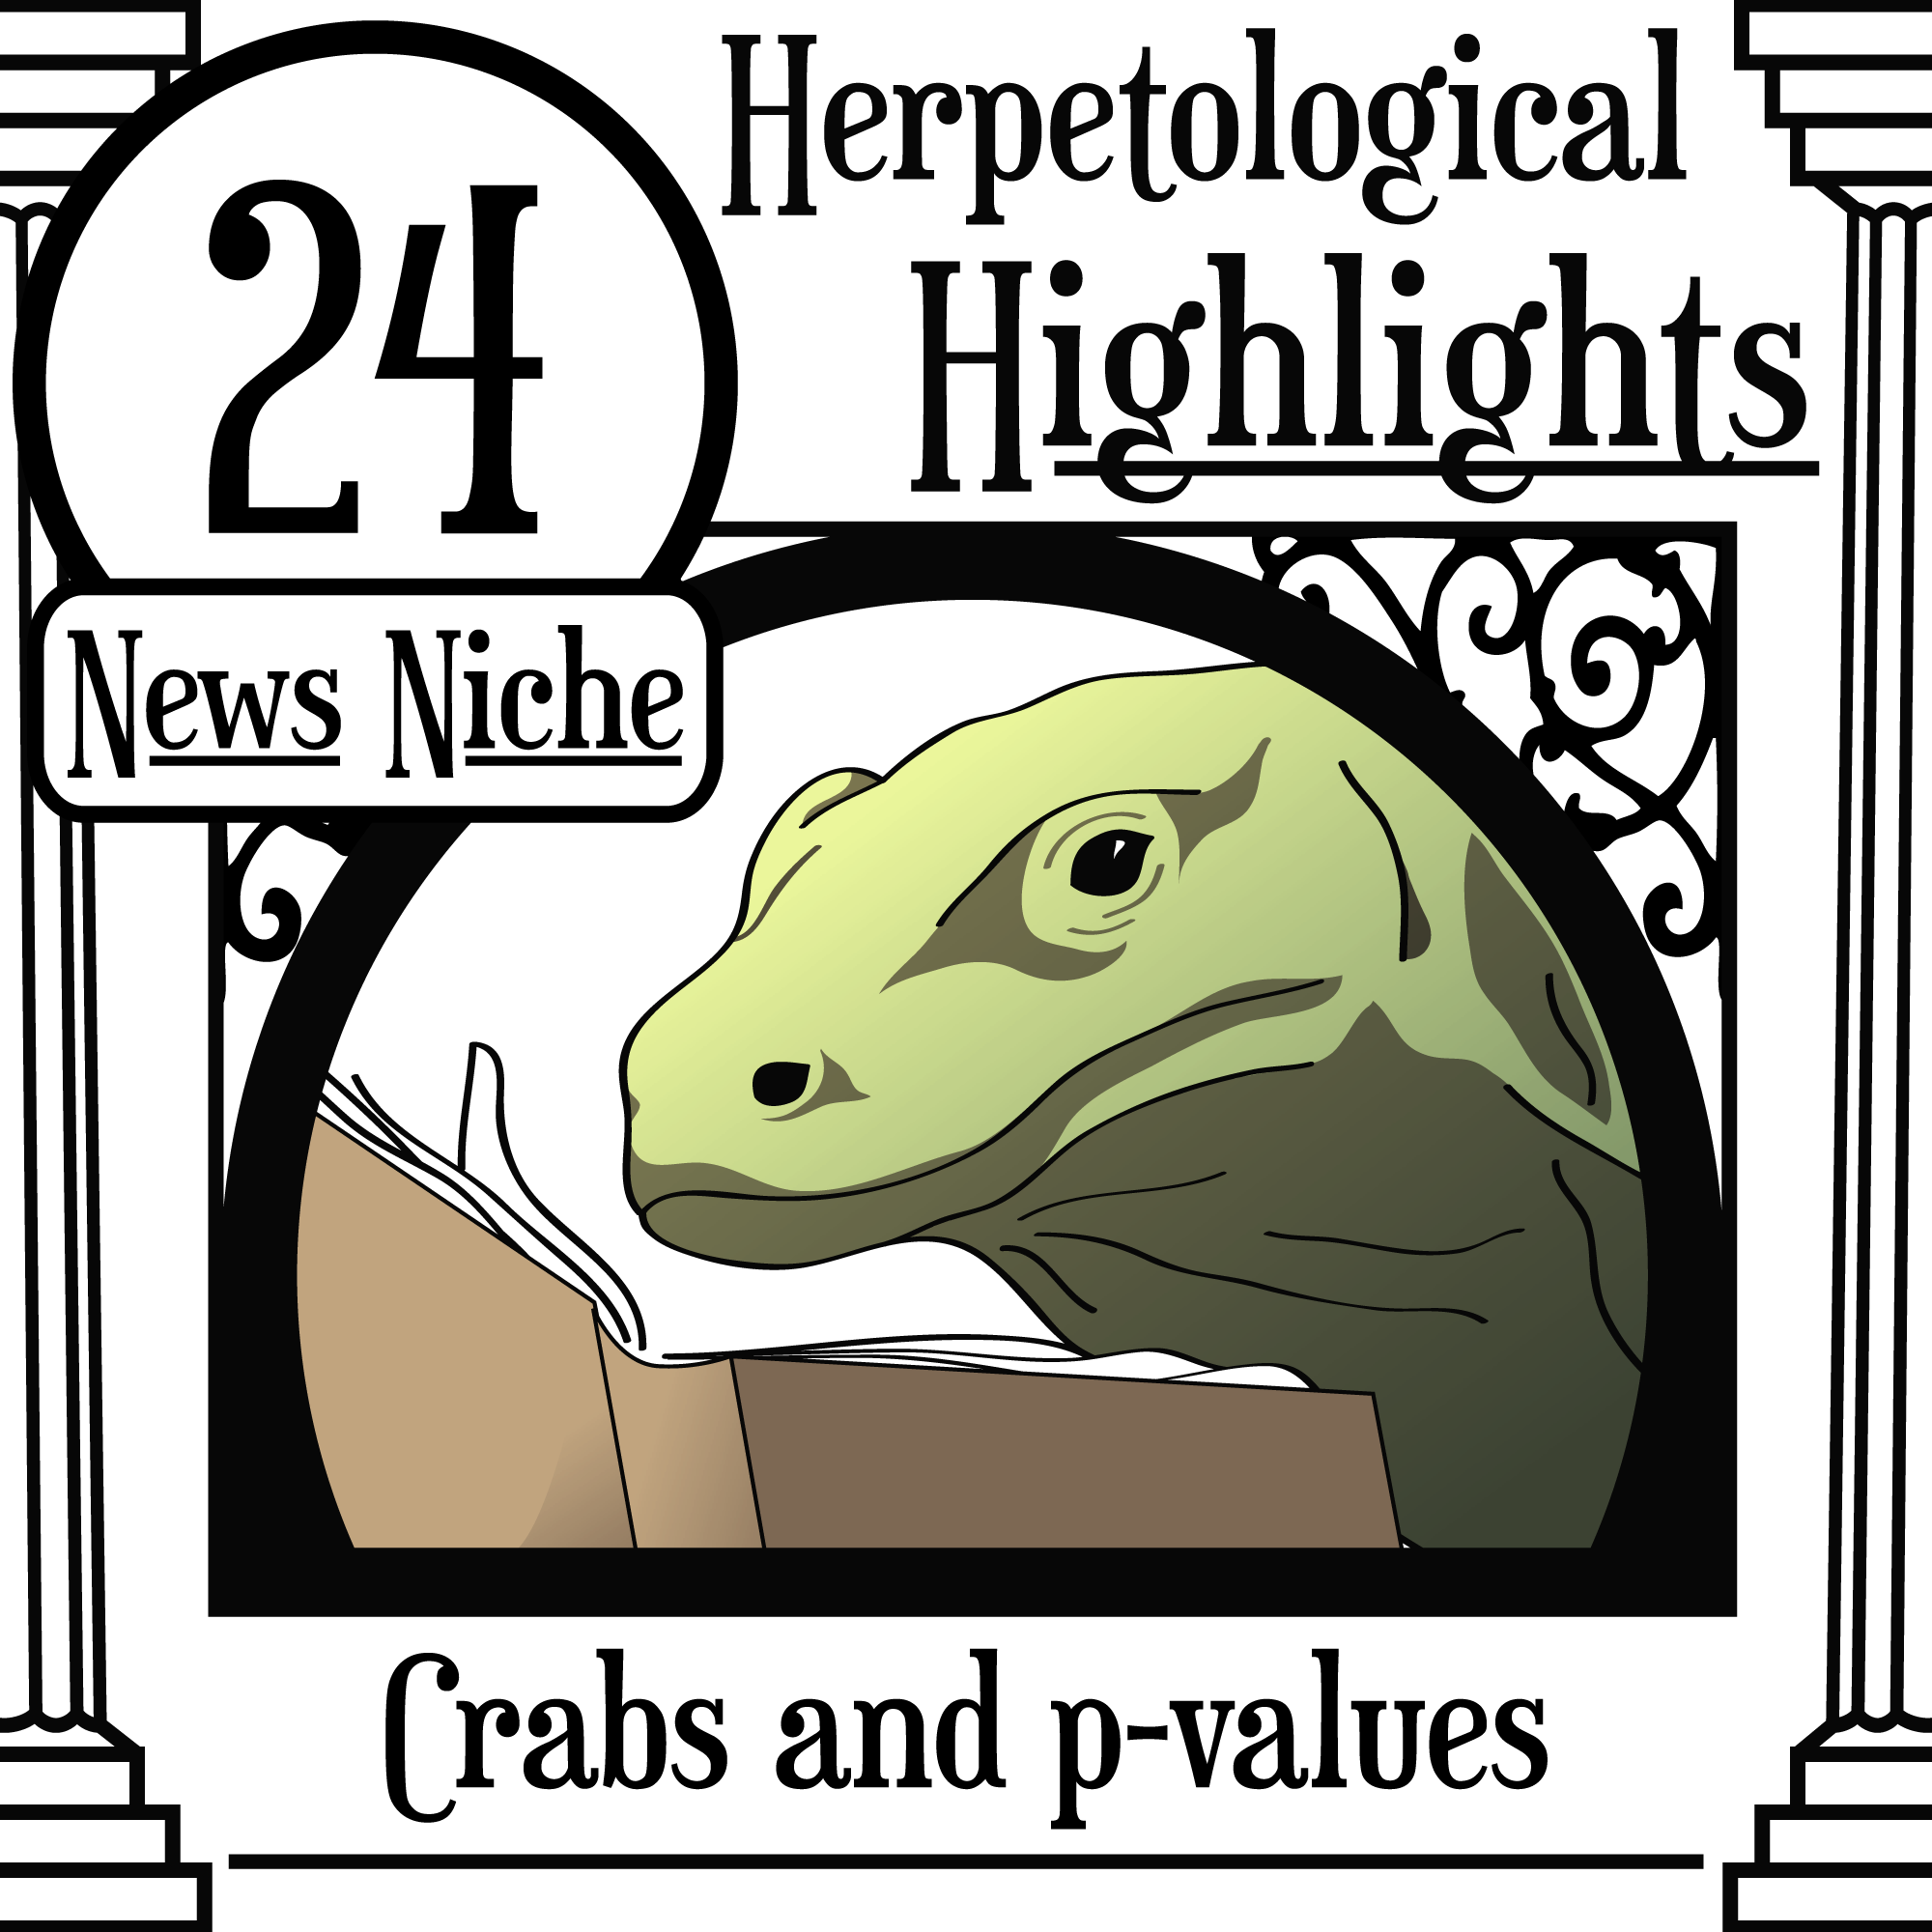 024 News Niche - Crabs and p-values